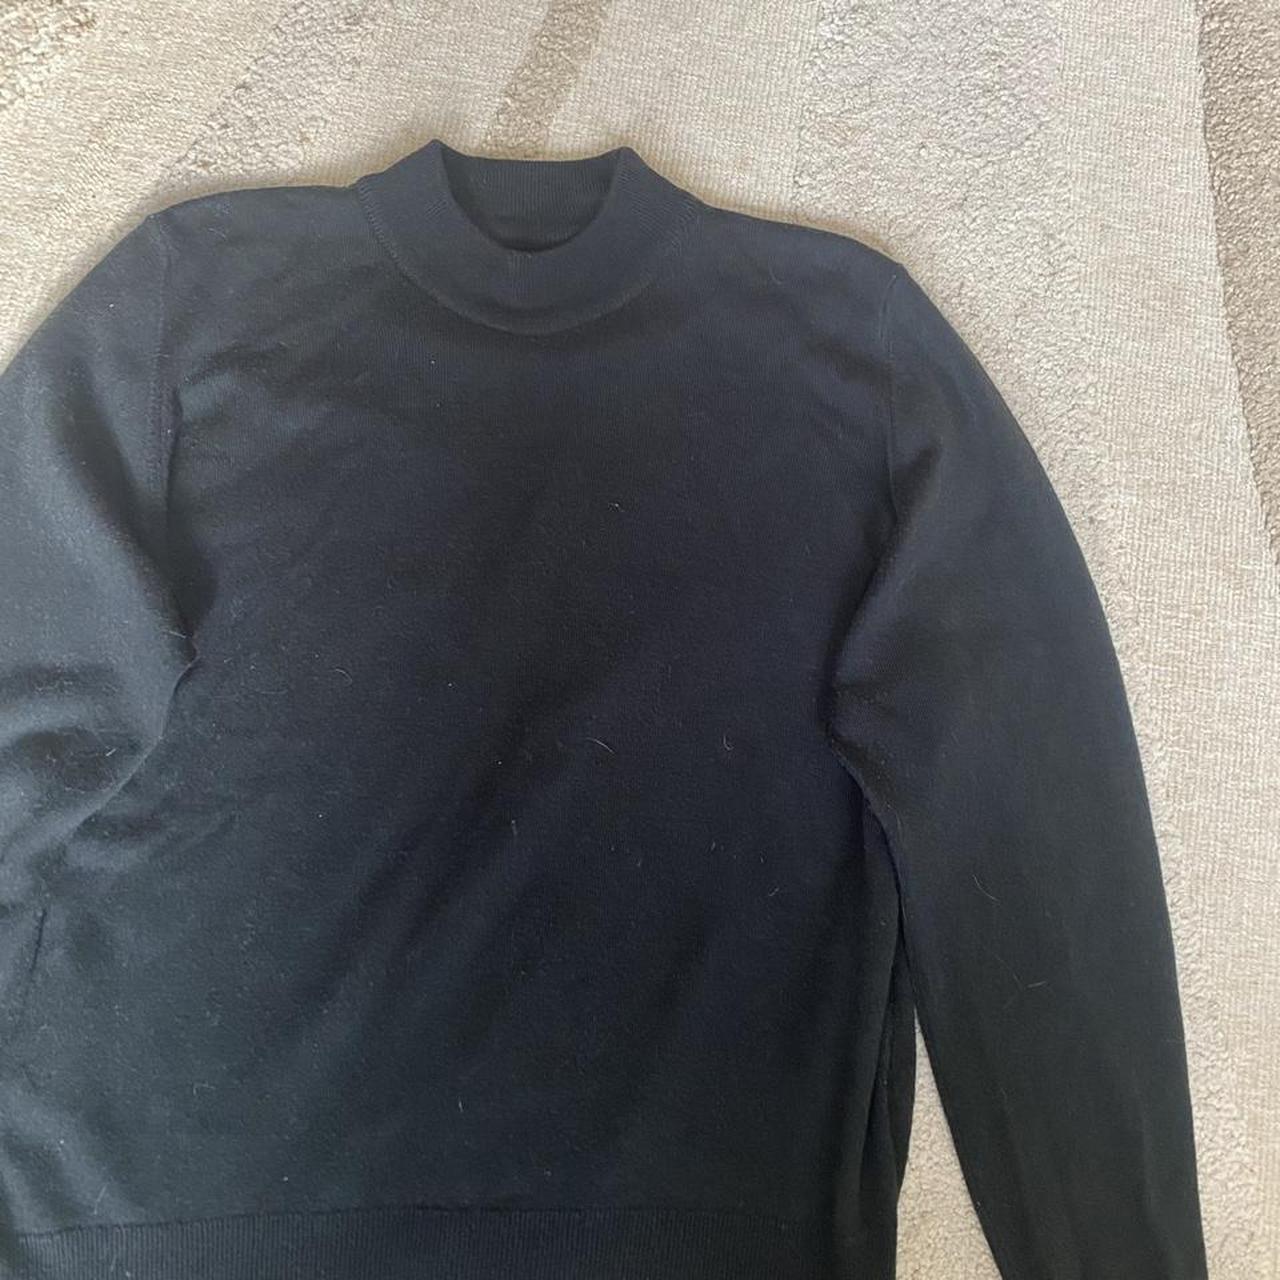 Black jumper - states size 18 but would fit as a... - Depop